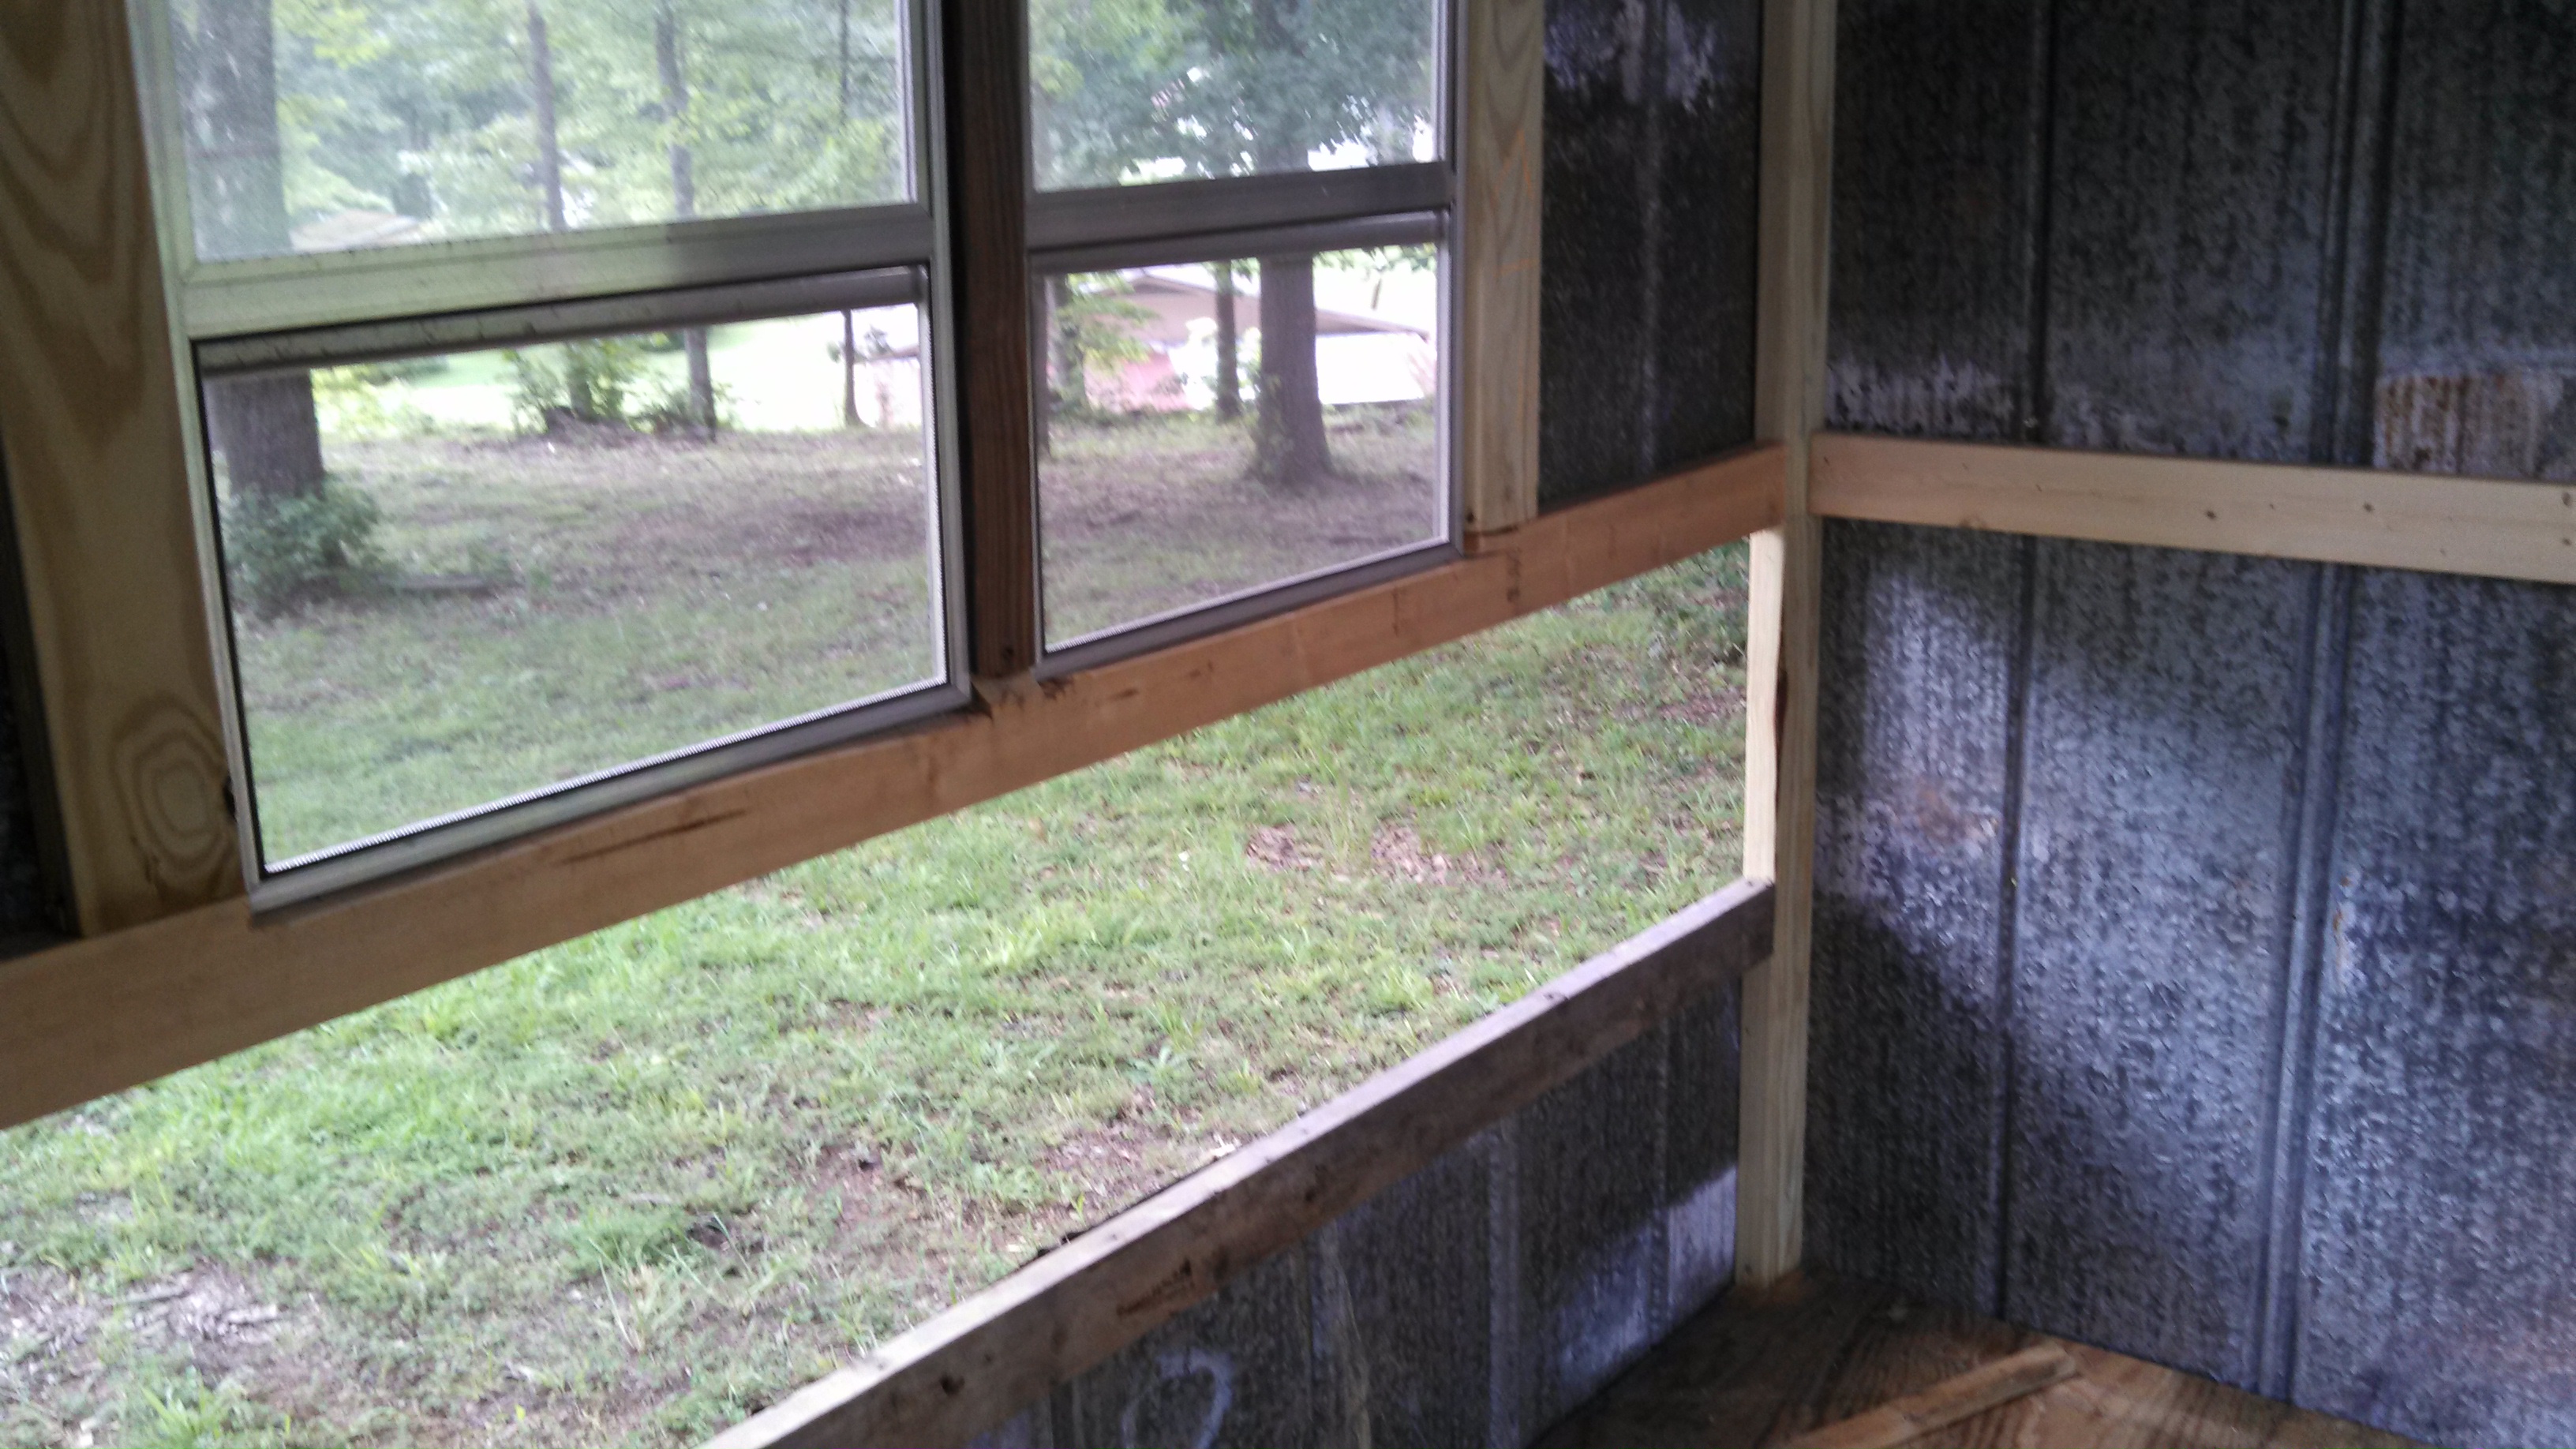 Here's a view if the inside before the nesting boxes.